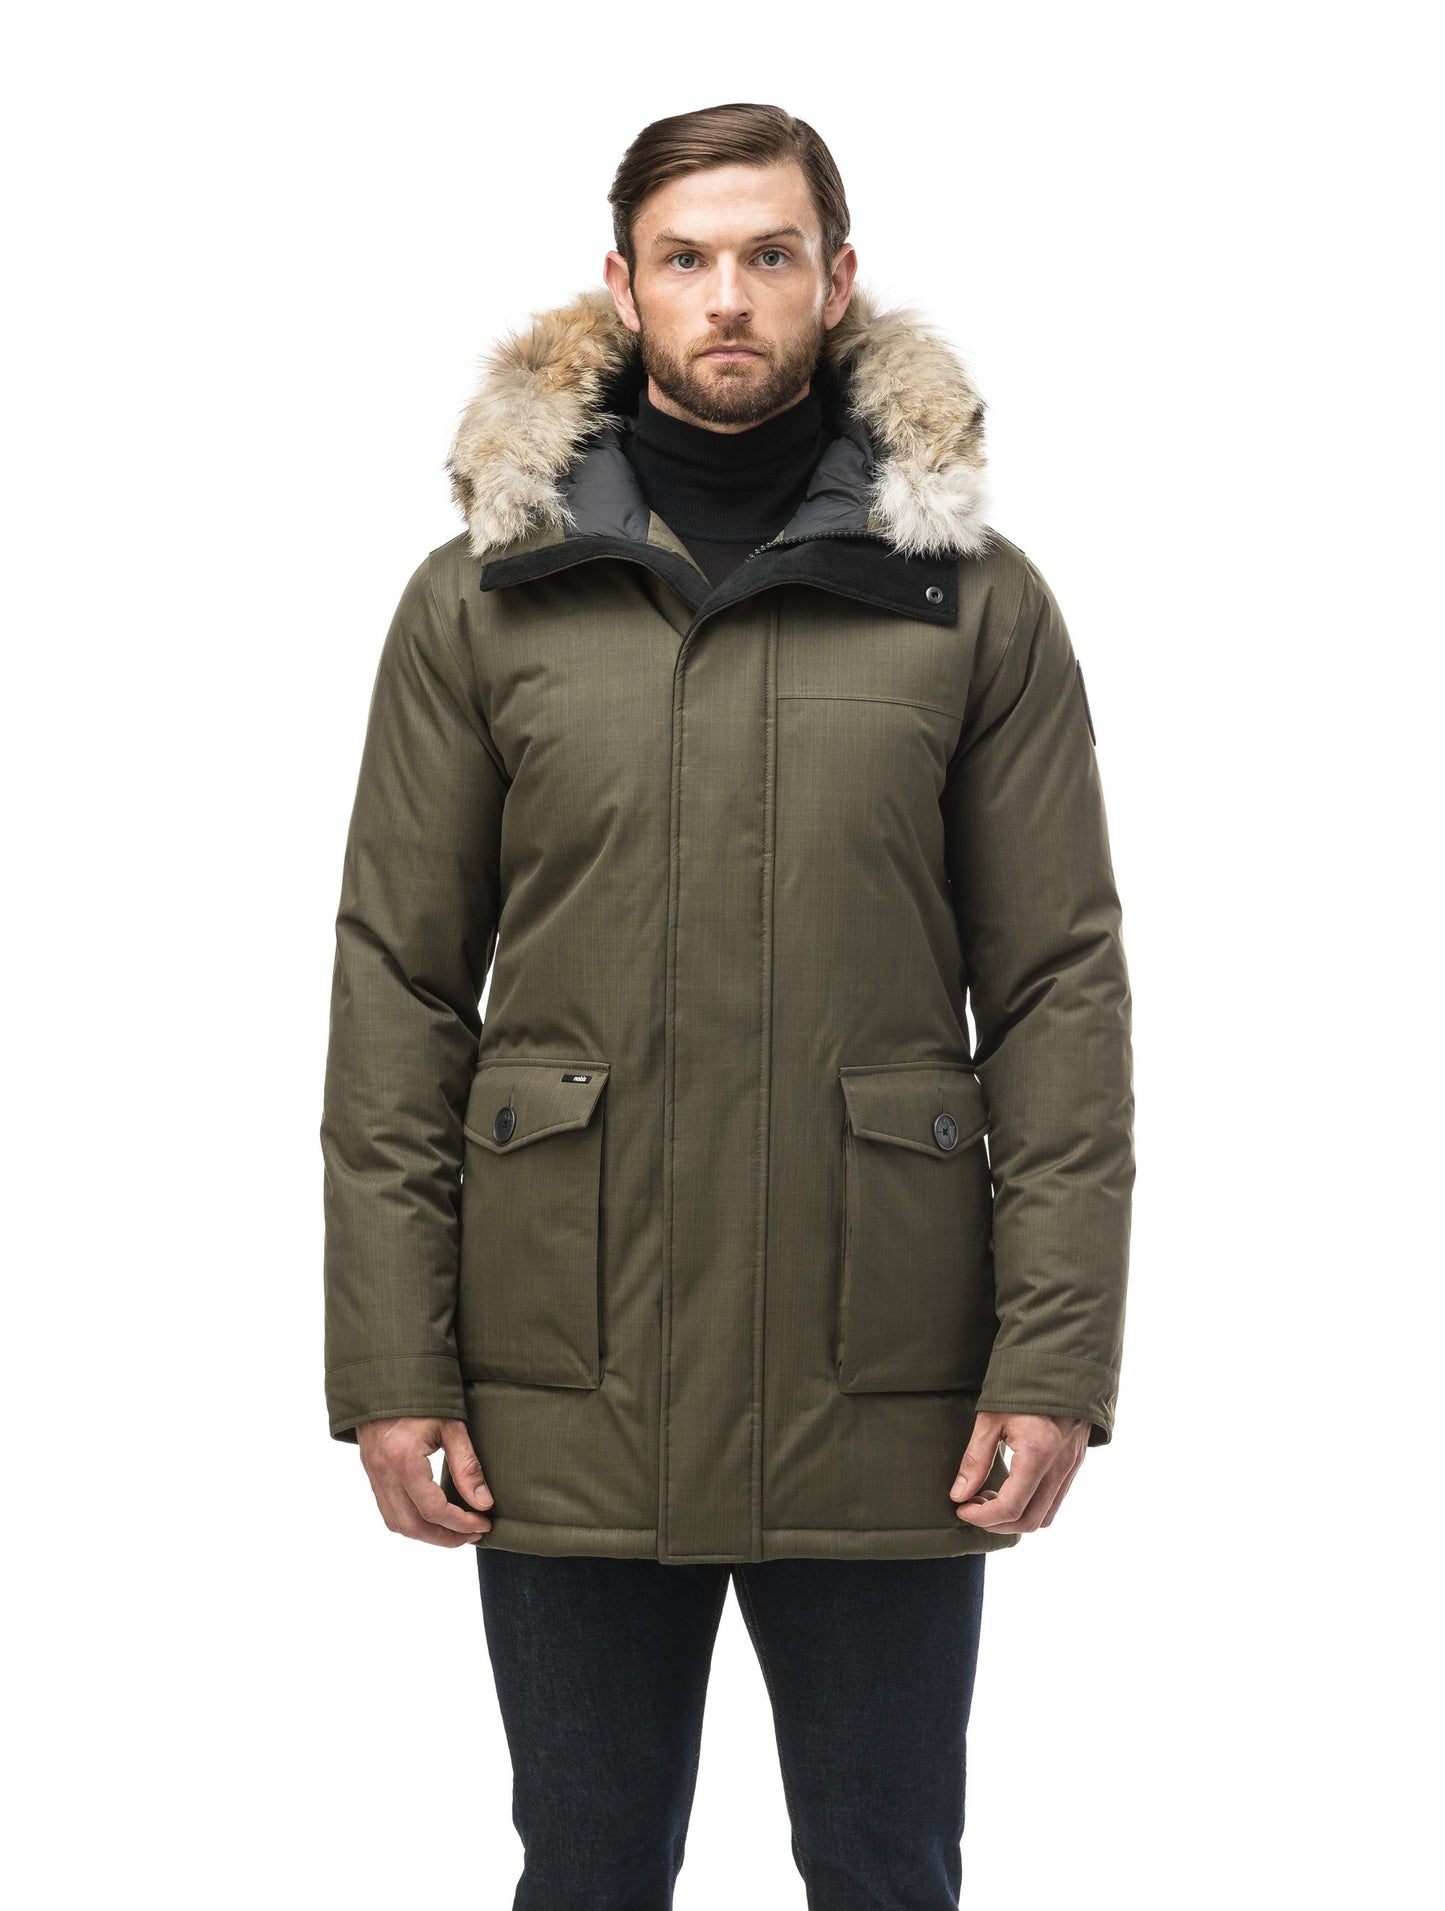 Men's slim fitting waist length parka with removable fur trim on the hood and two waist patch pockets in CH Army Green